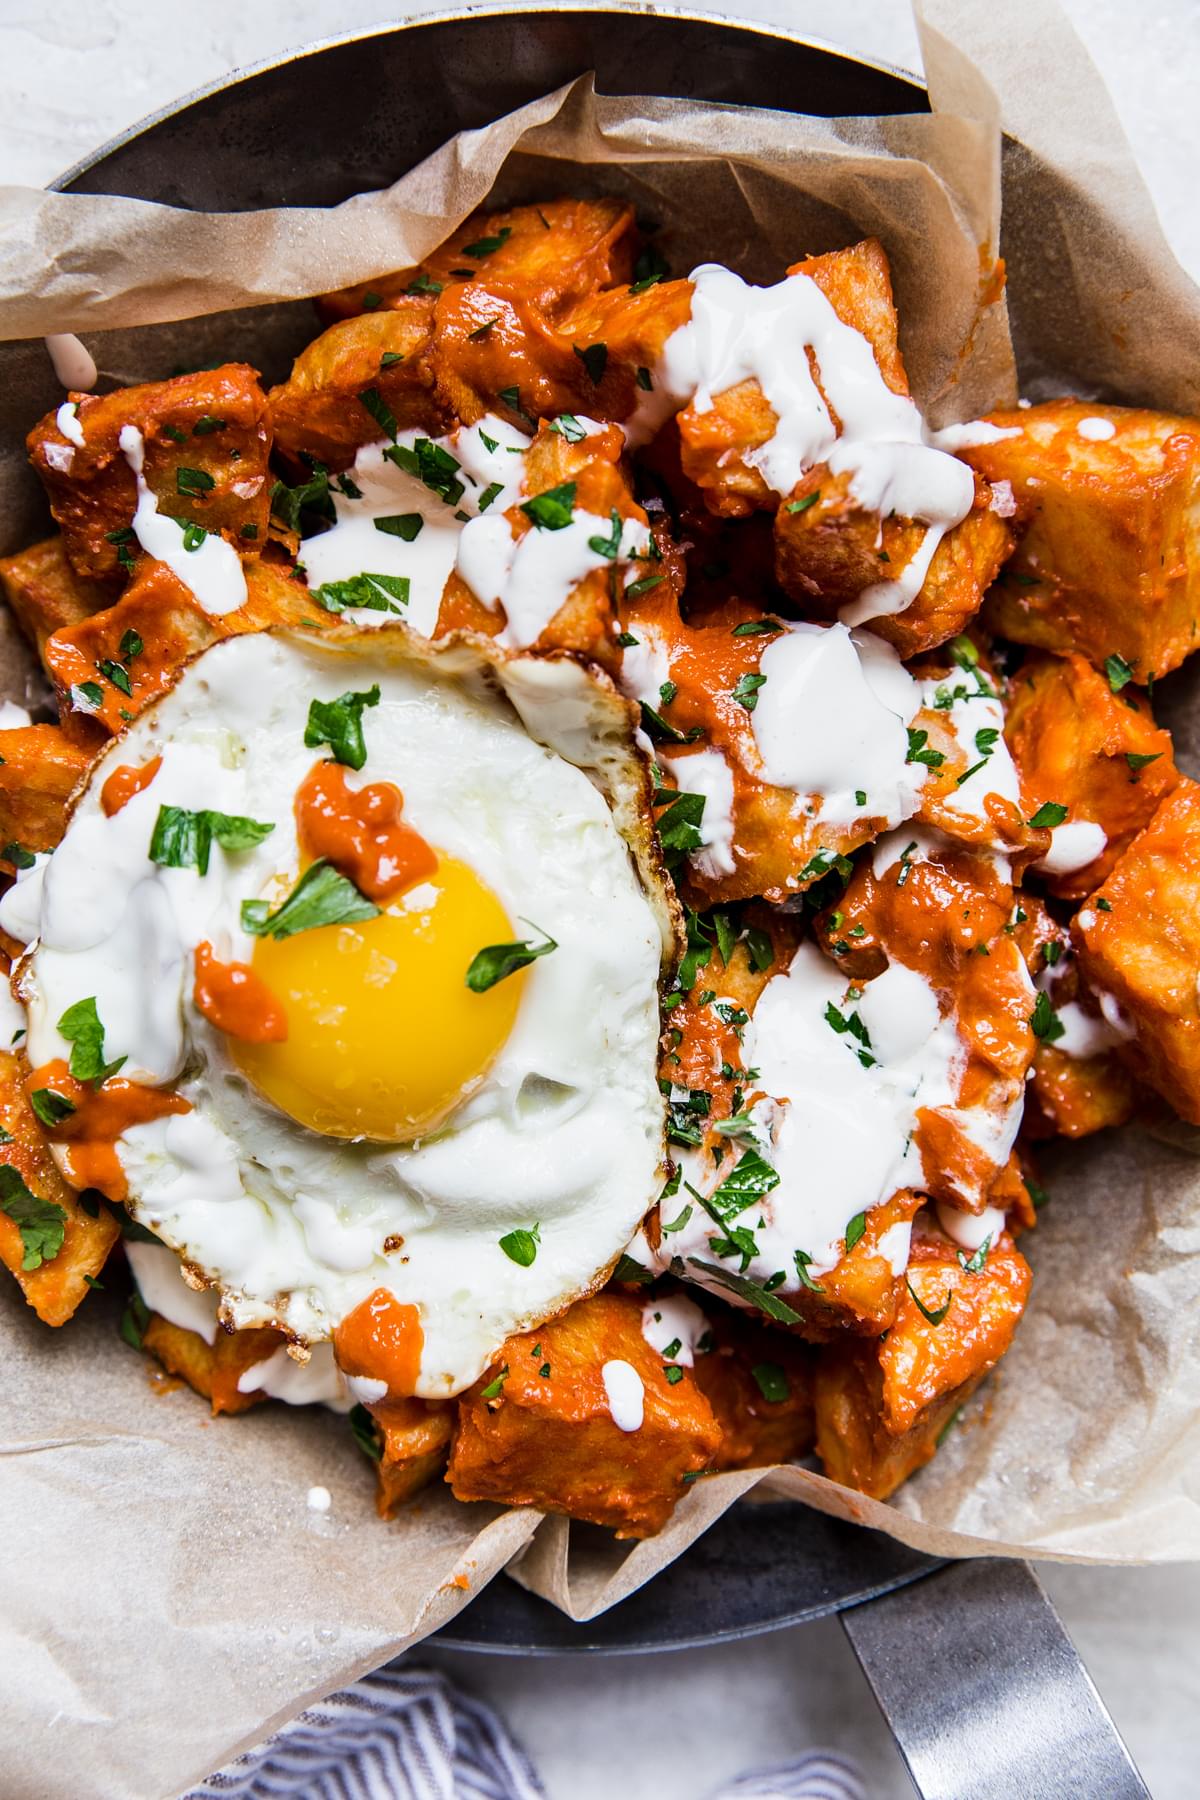 a dish of homemade patatas Bravas topped with garlic aioli, fresh parsley and a fried egg